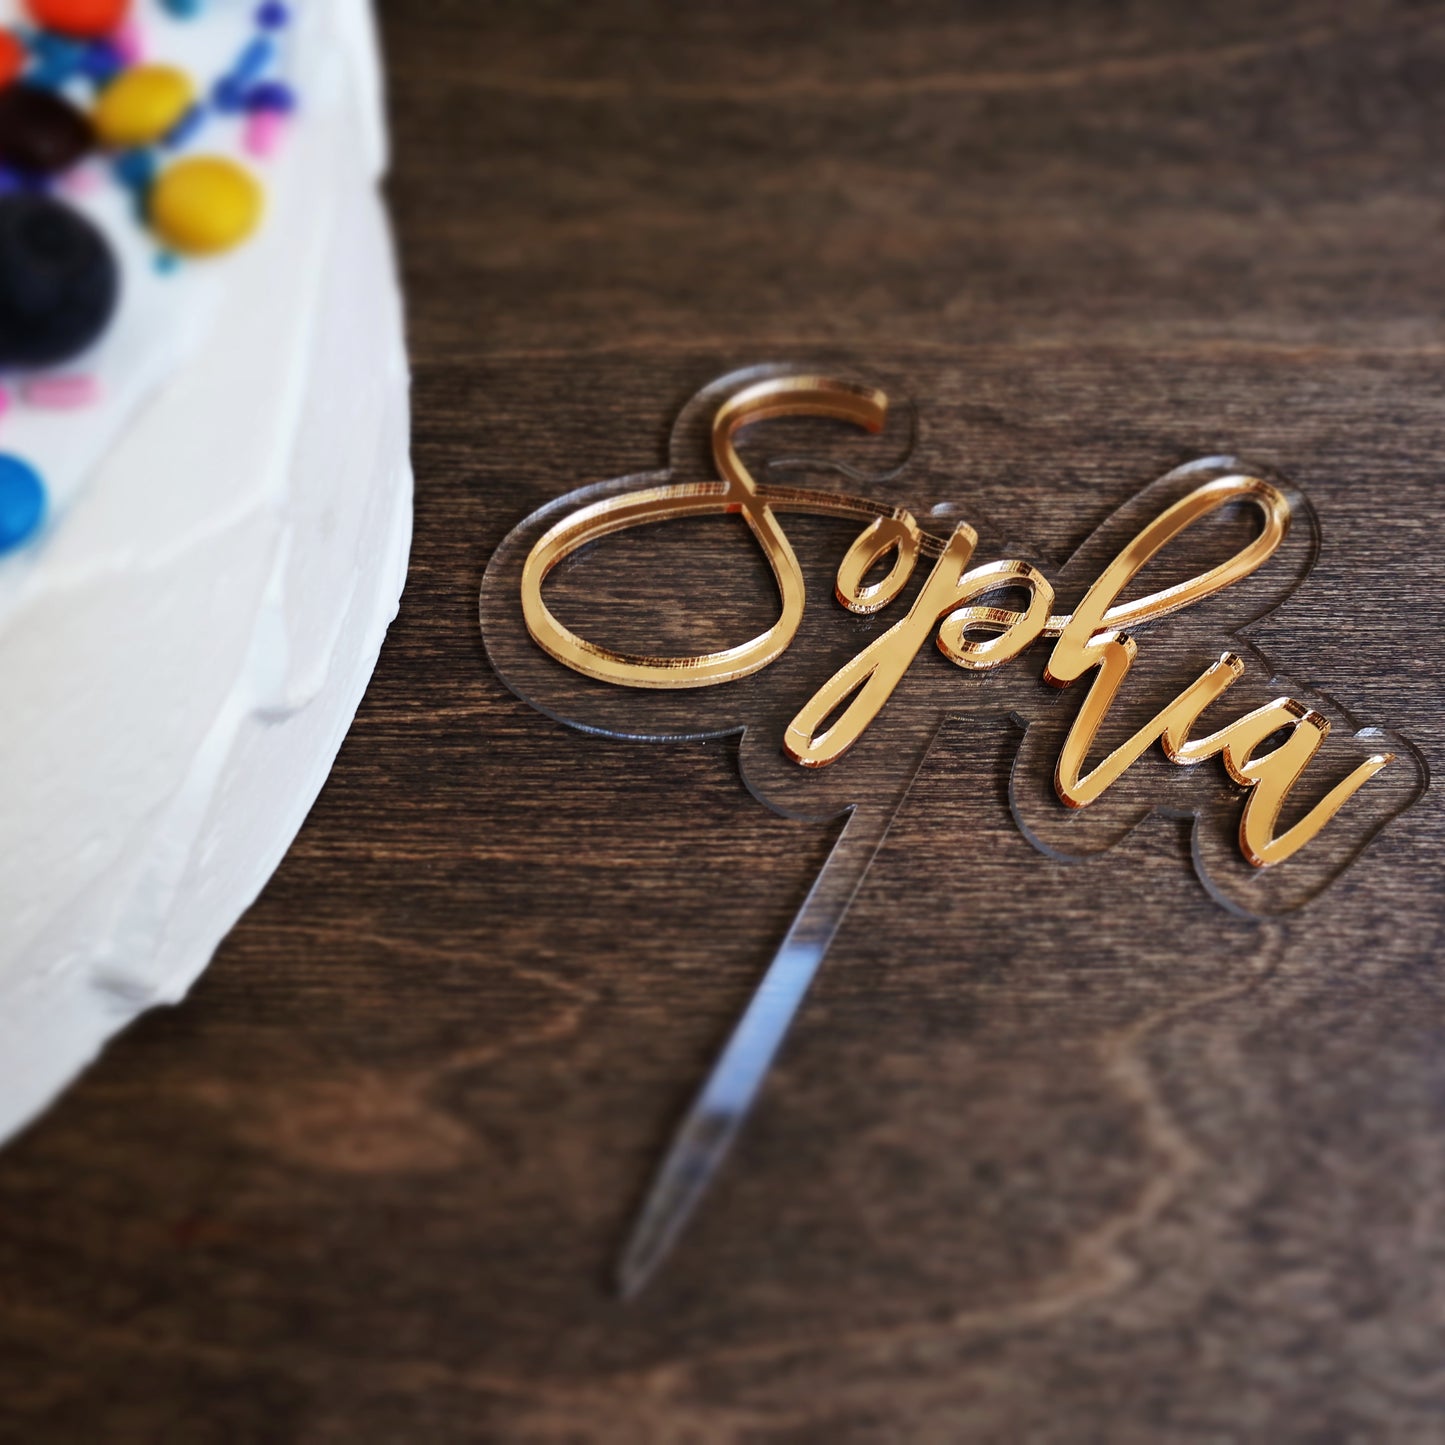 Double layer acrylic name birthday cake topper clear and mirrored gold acrylic 3d custom cake toppers wedding personalized birthday acrylic cake toppers modern last name cake decor pastel acrylics mirrored acrylic wood